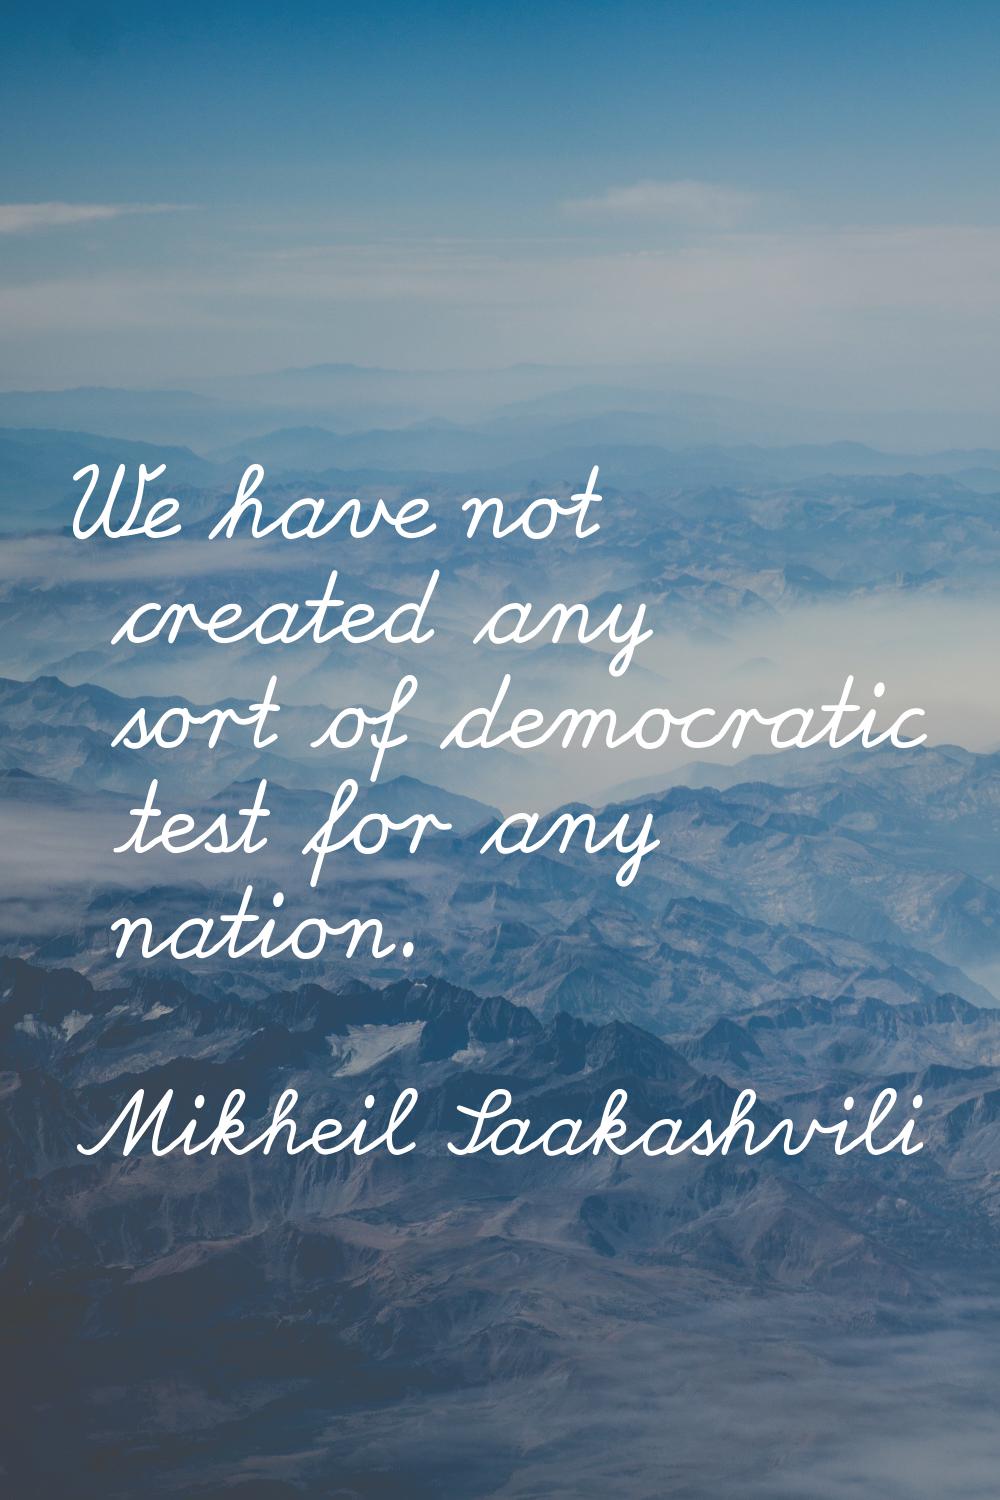 We have not created any sort of democratic test for any nation.